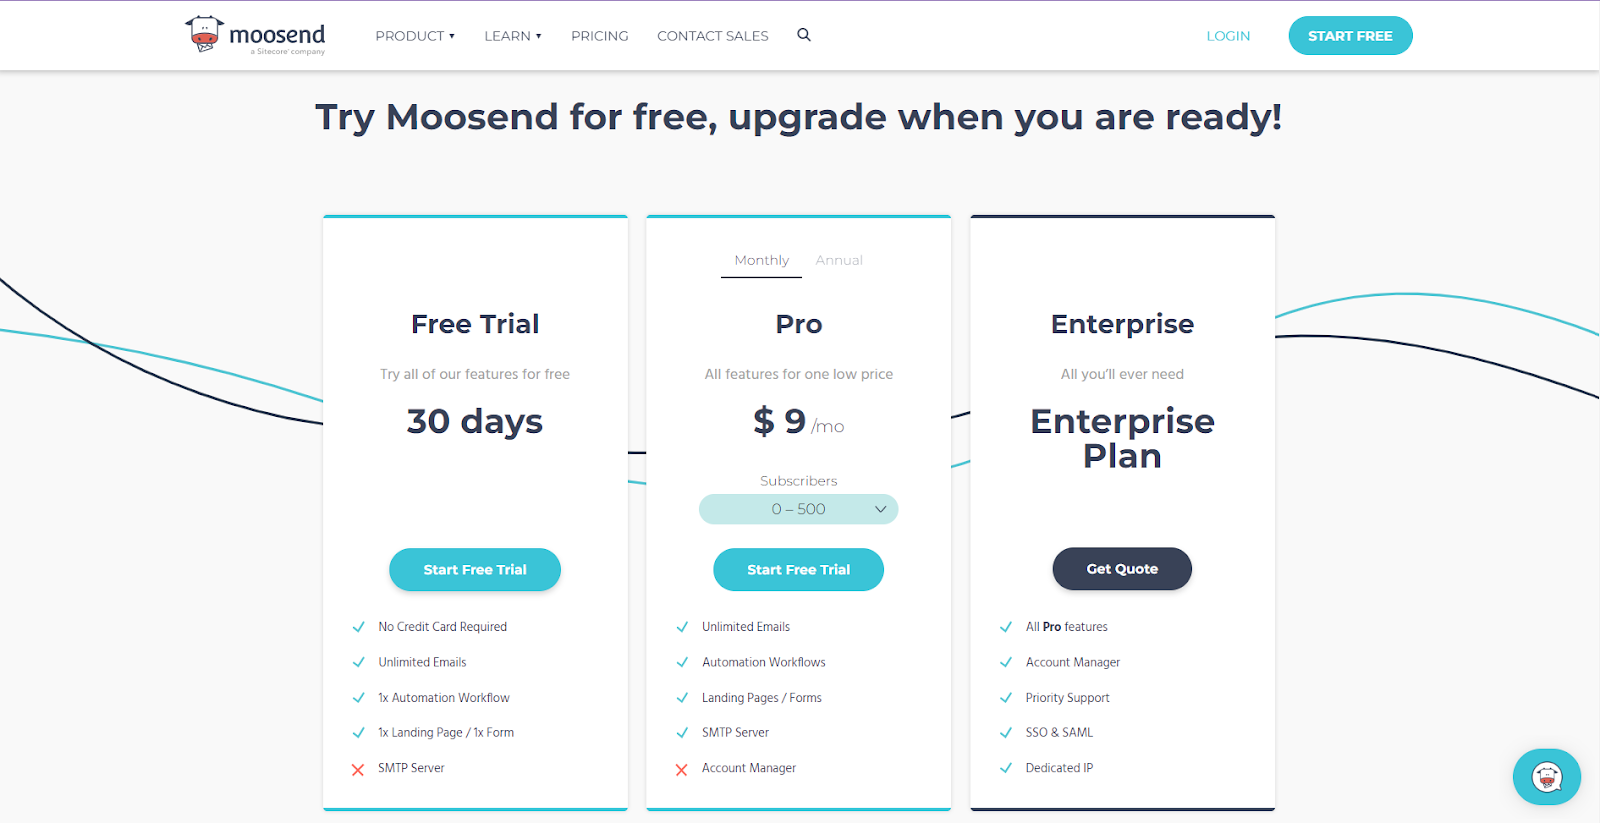 Screenshot of the typical pricing plans that Moosend offers